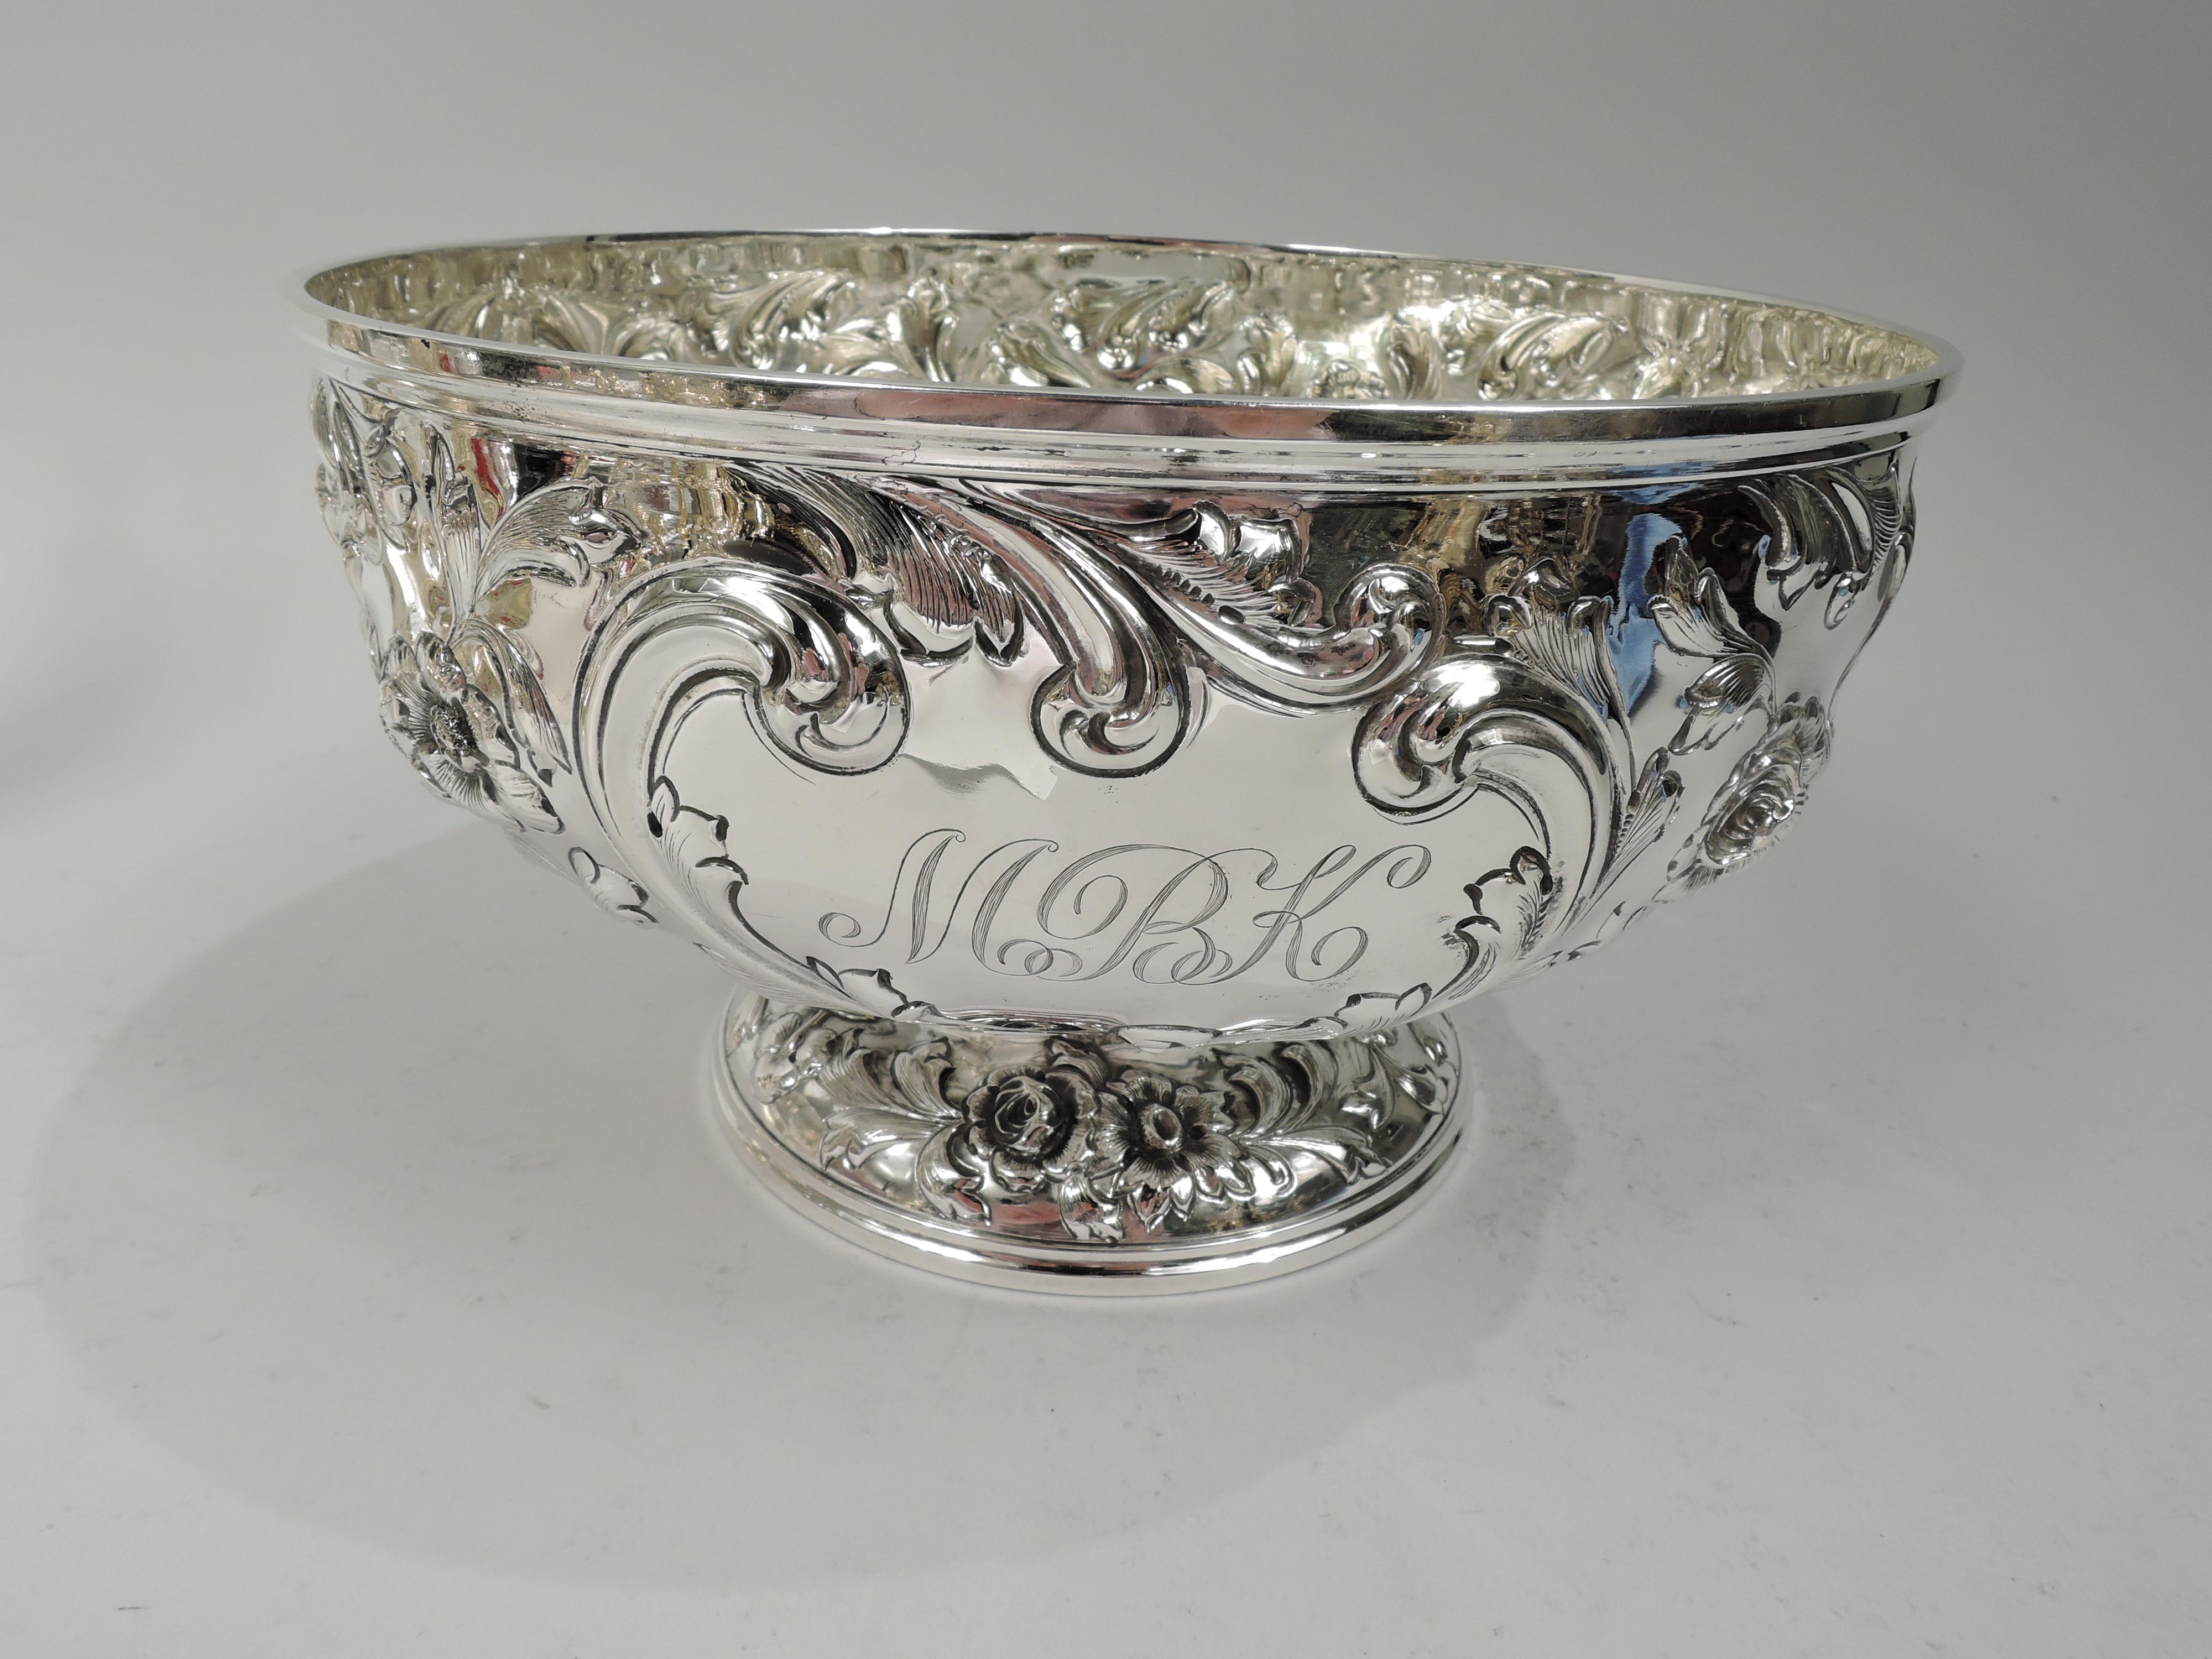 Turn-of-the-century sterling silver centerpiece bowl. Made by Davis & Galt in Philadelphia. Round and curved on raised foot. Repousse ornament. Scattered flowers and leaves, and leafing scrolled frame engraved with 3-letter script monogram. Floral